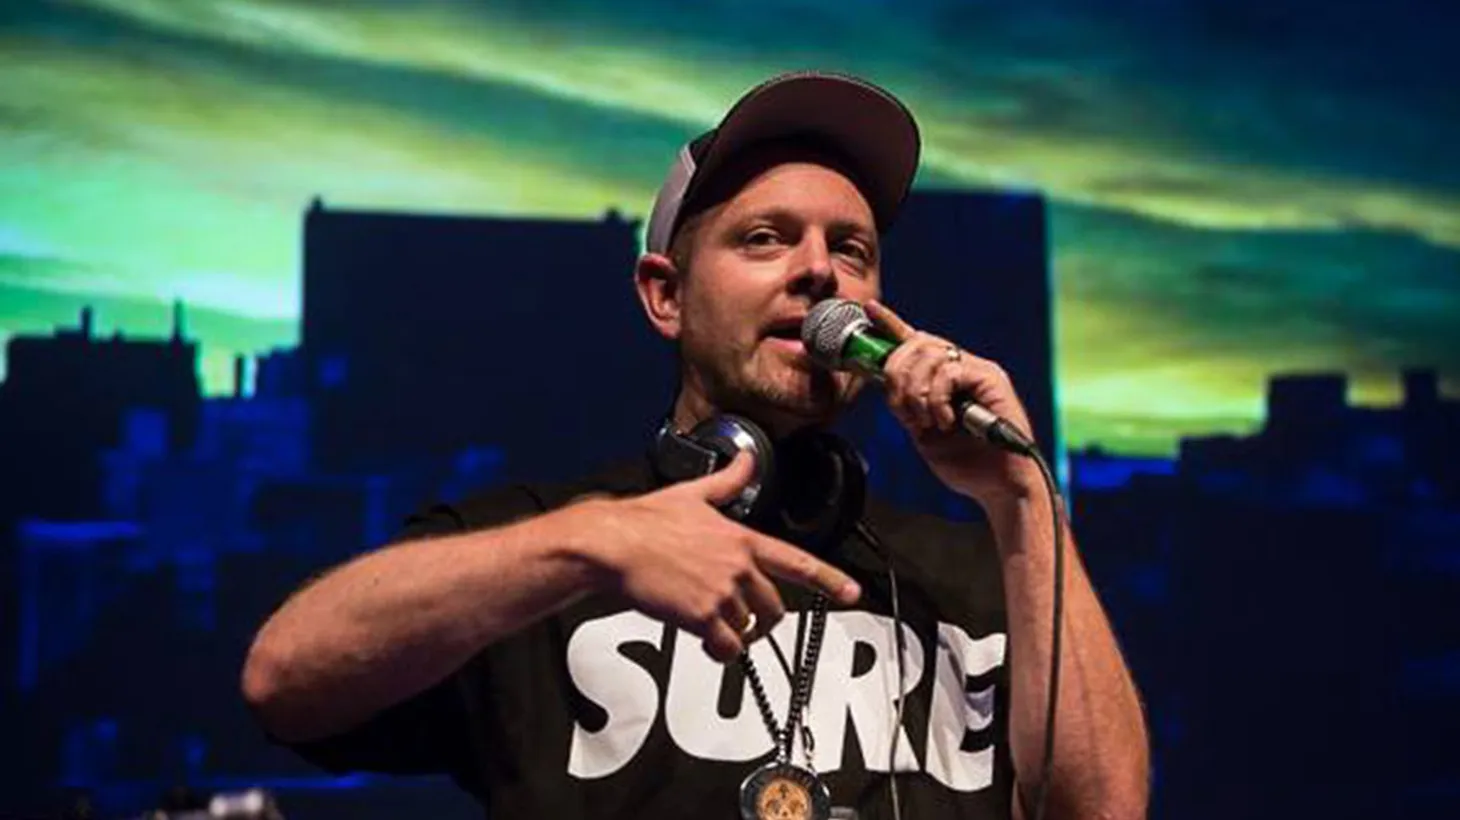 Legendary turntablist and beat master DJ Shadow returns with his fourth solo album since the release of his groundbreaking debut over 20 years ago.